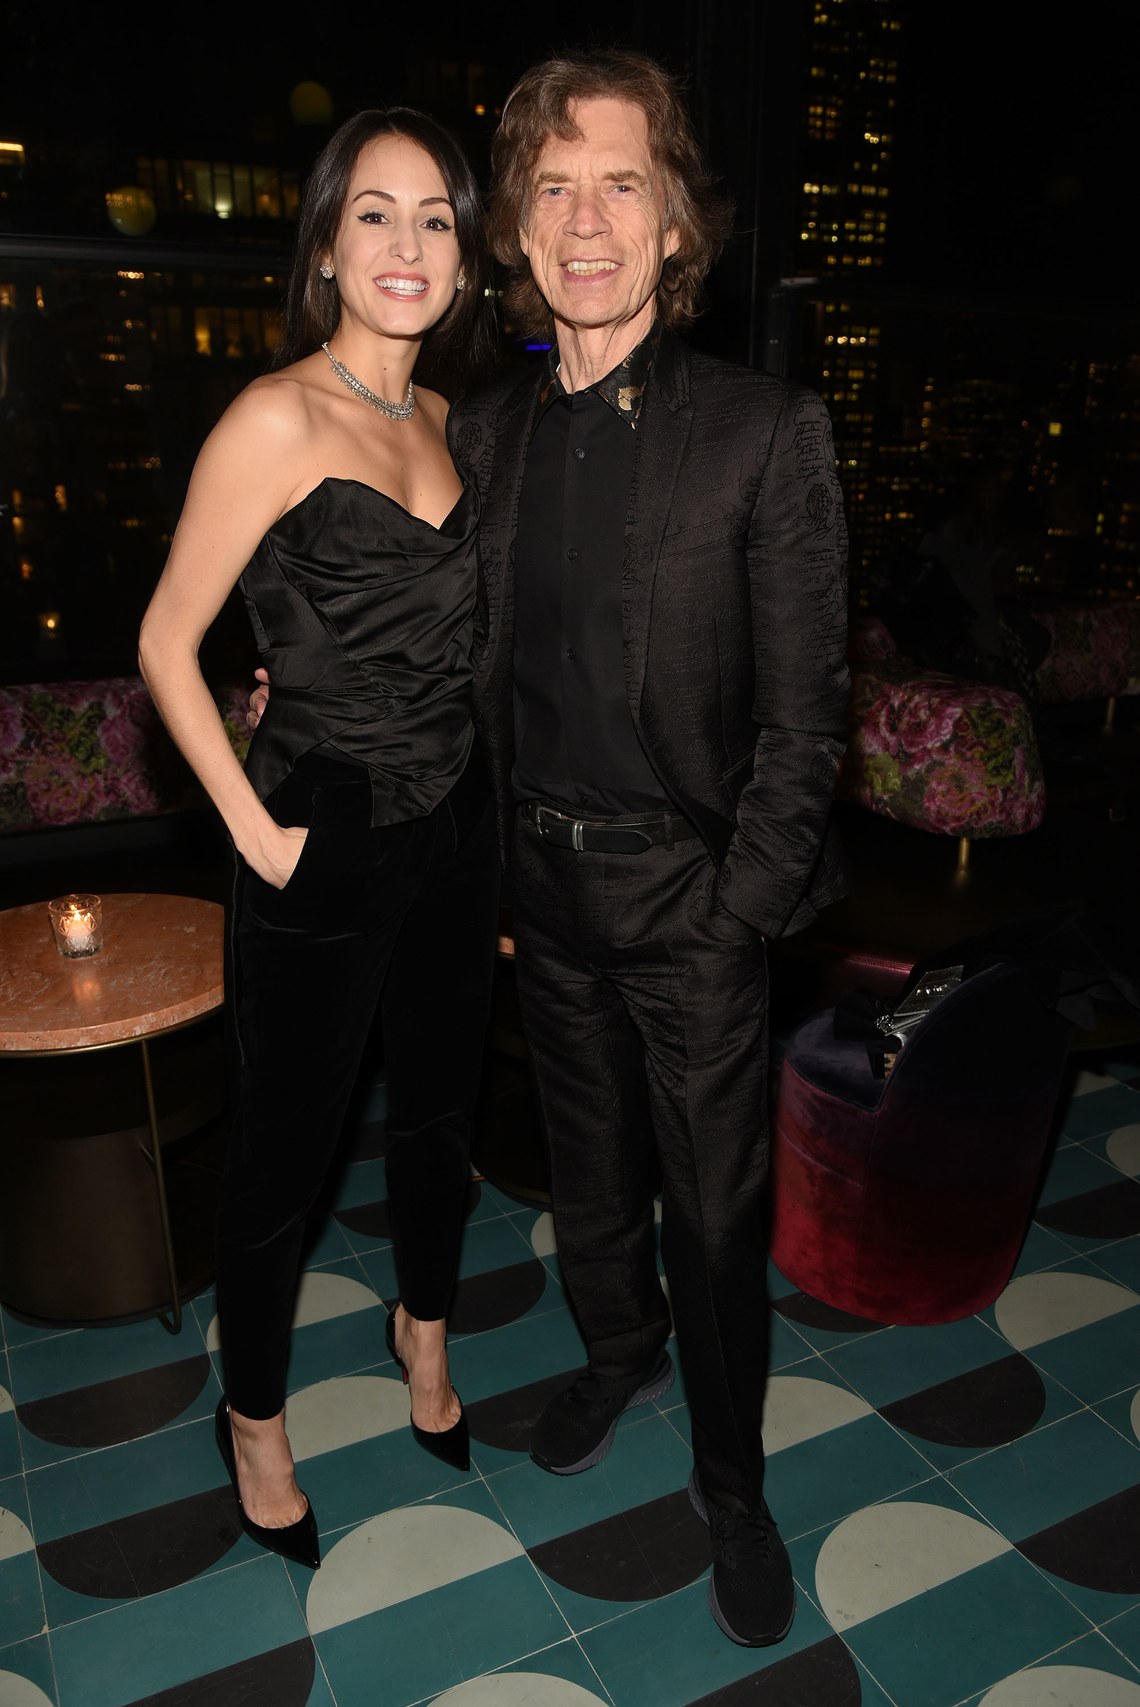 Melanie Hamrick and Mick Jagger Celebrate their new ballet at The Fleur Room